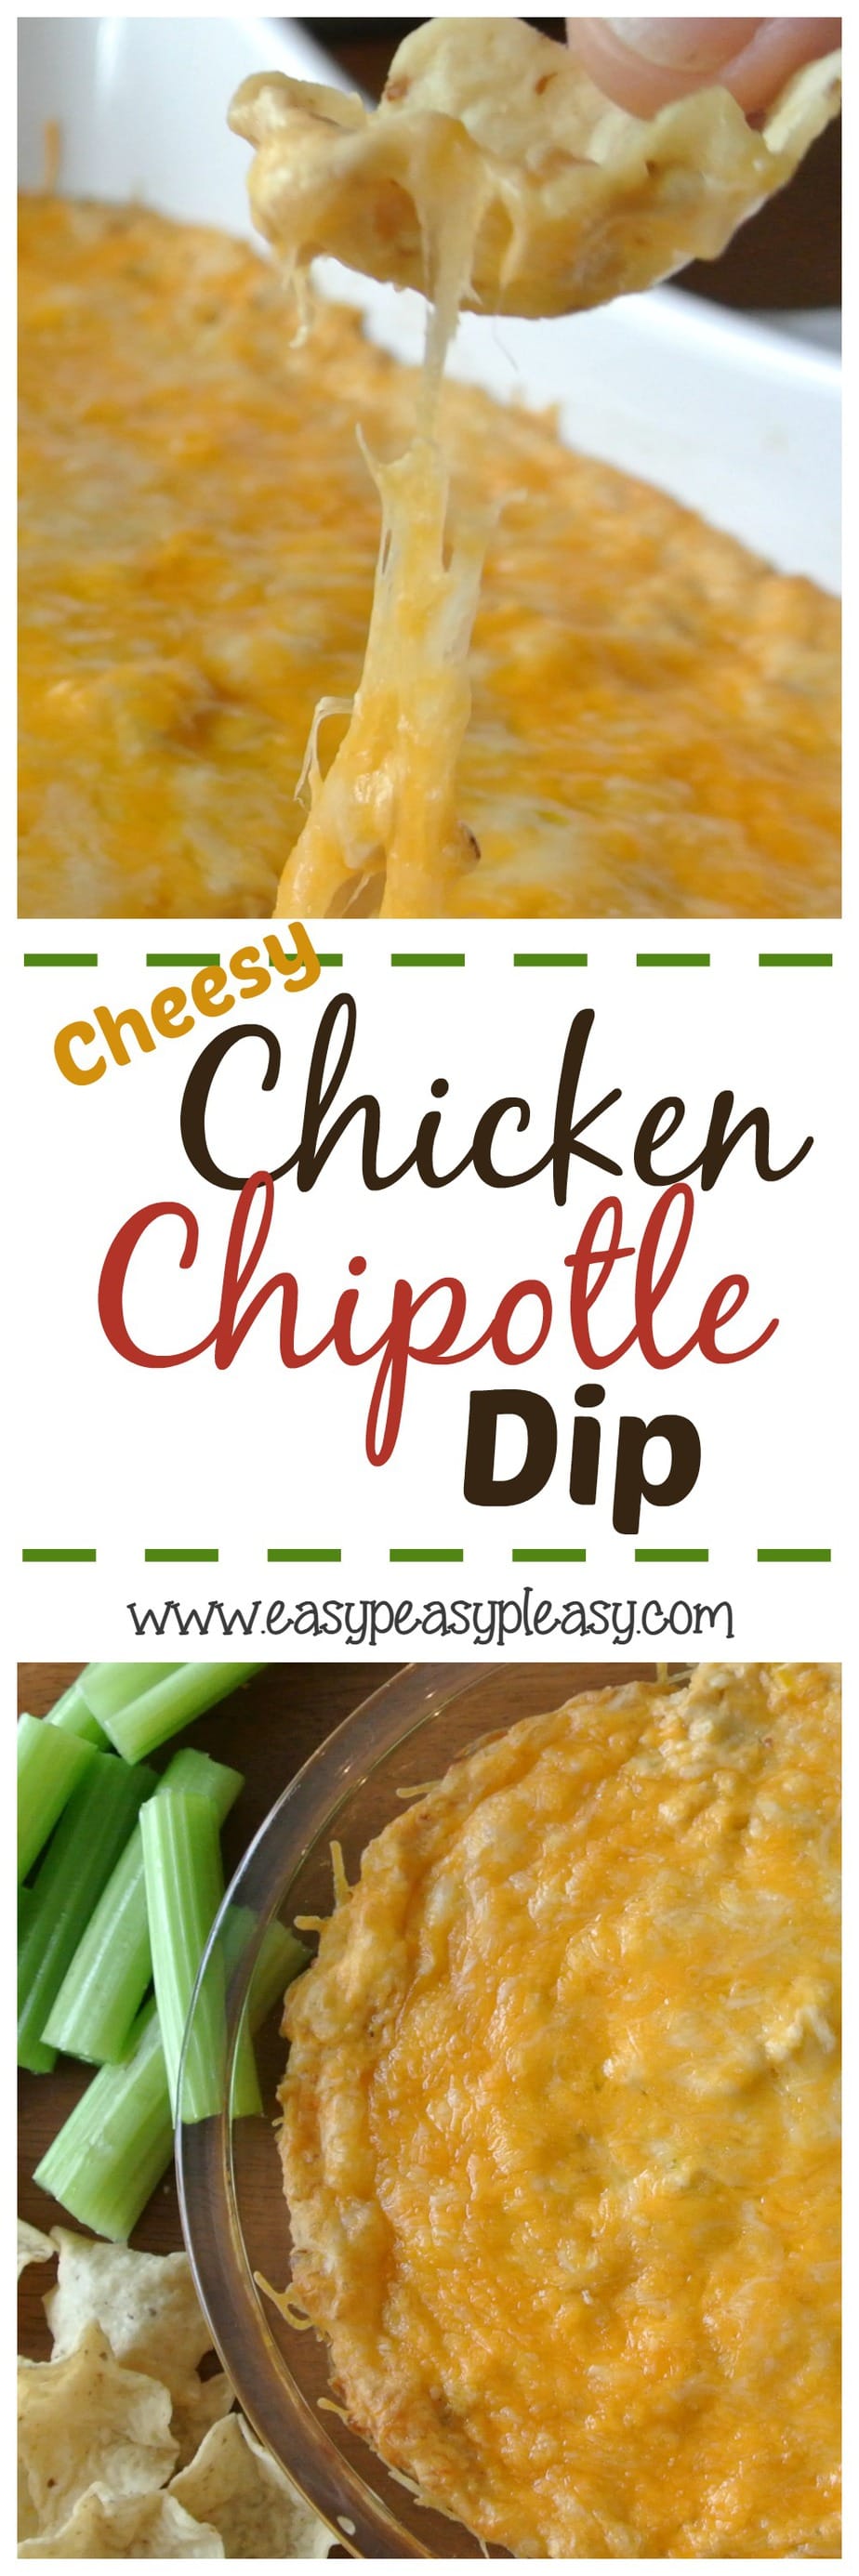 Cheesy Chicken Chipotle Dip is the perfect appetizer for your Super Bowl Party!